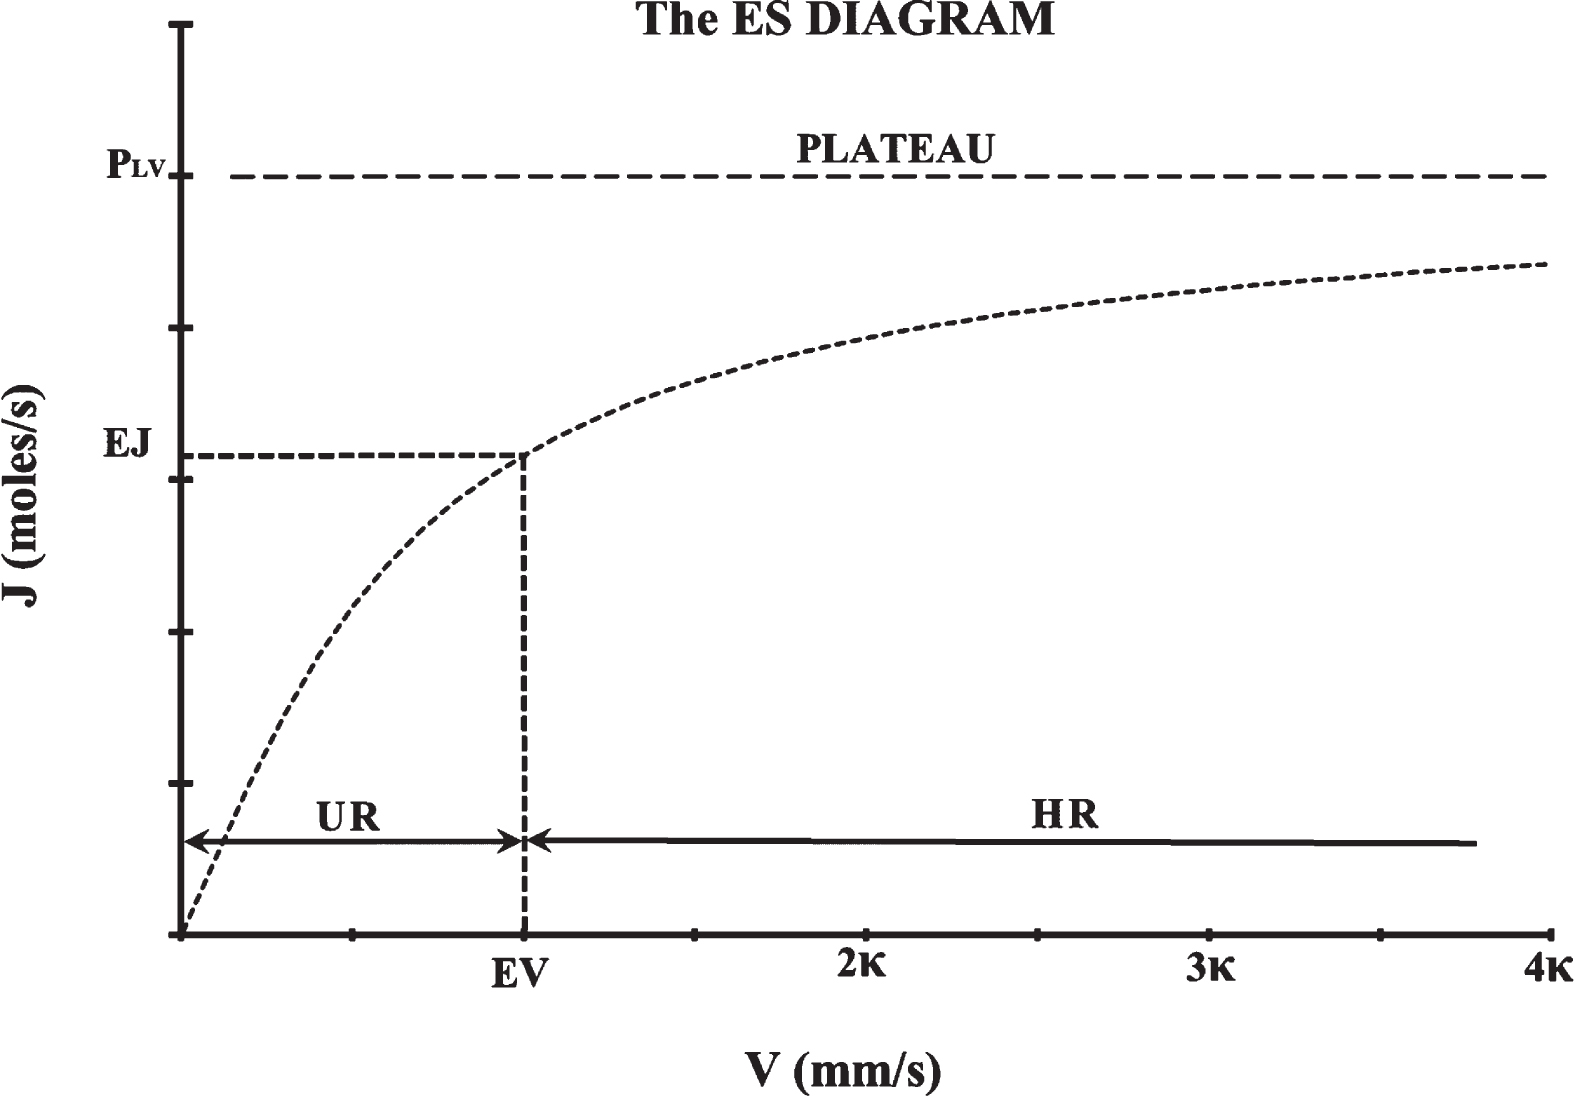 The equilibrium state (ES) diagram. The ES for a single microvessel is presented with a diagram derived from the “velocity-diffusion (V-J) equation” [6]. The independent variable V is the axial blood velocity inside the microvessel and J is the diffusion mass rate for each small molecular weight solute in the blood. Kappa (κ) is the velocity constant and PLV is the plateau value of J. At the equilibrium state the local metabolic demand is constant and so is the mass diffusion rate J for each substance. According to the V-J equation, it can be considered that the equilibrium mass diffusion rate (EJ) corresponds to an equilibrium axial blood velocity (EV). The equilibrium velocity (EV) at normal resting conditions, was taken here as equal to the velocity constant (κ). Axial velocities lower than the equilibrium velocity EV are inside the “underemic range” (UR) of velocities. Axial velocities higher than the equilibrium velocity EV are inside the “hyperemic range” (HR) ofvelocities.